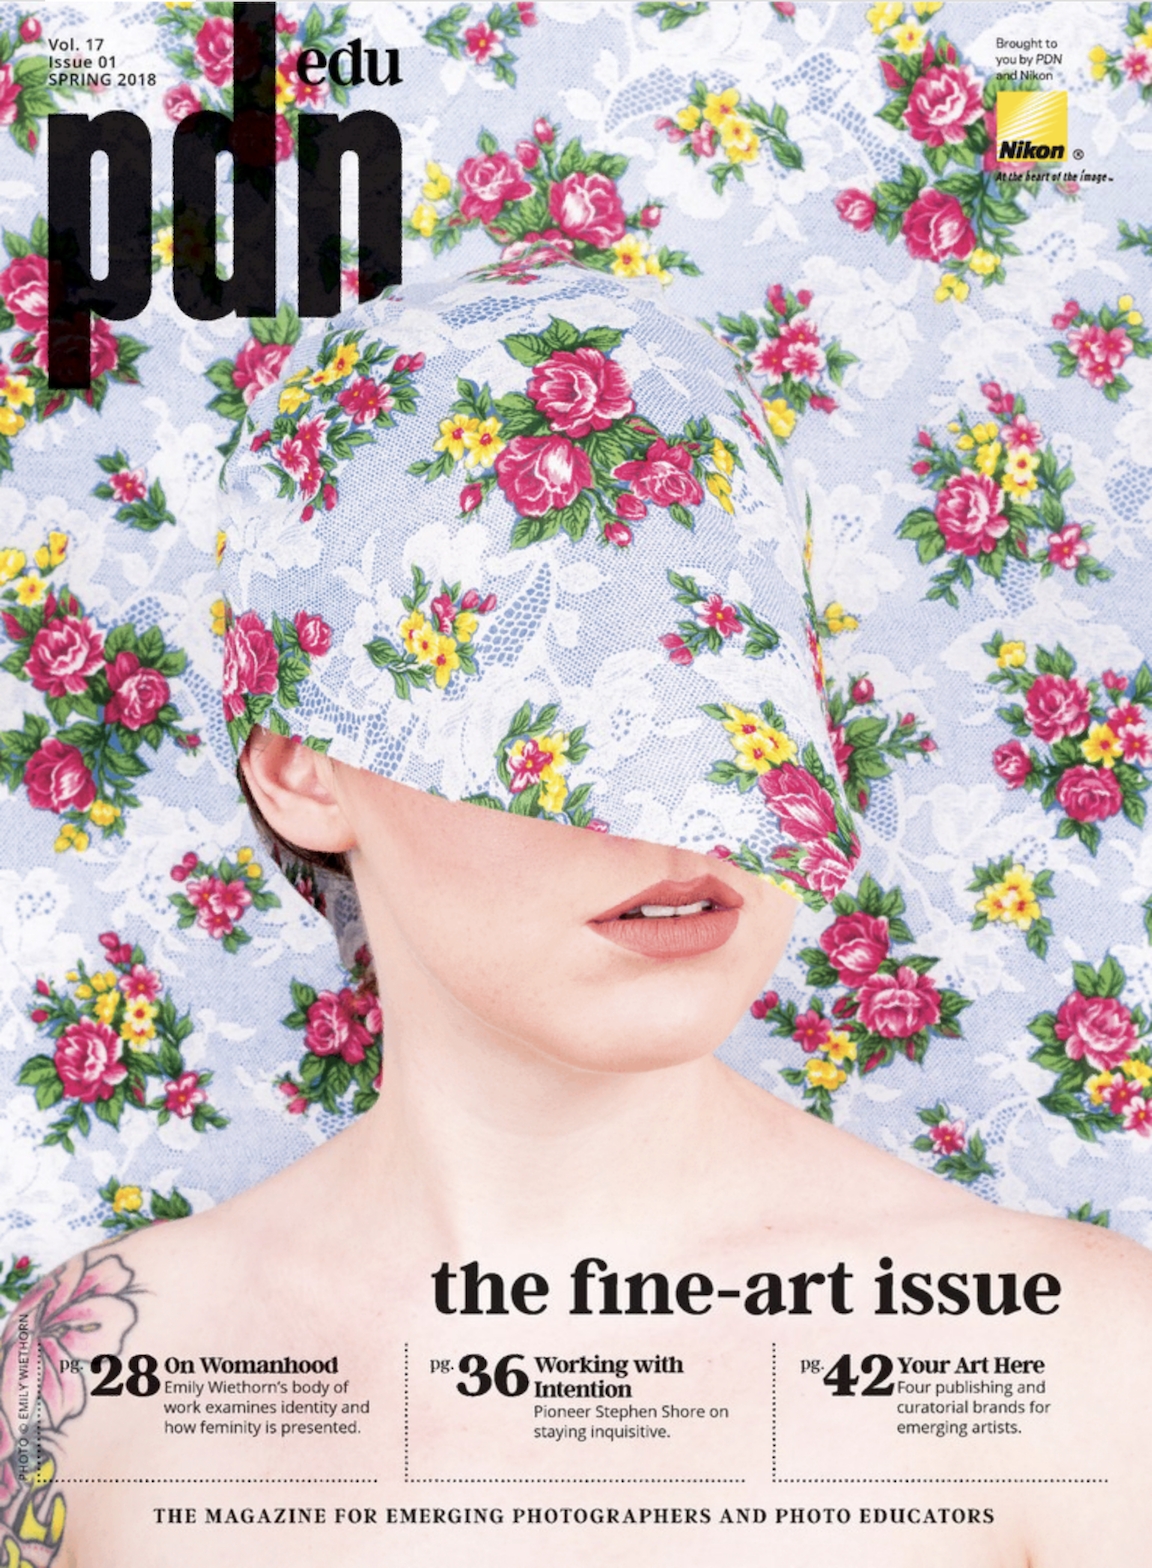 PDN Edu Spring 2018 Cover, Image by Emily Wiehorn